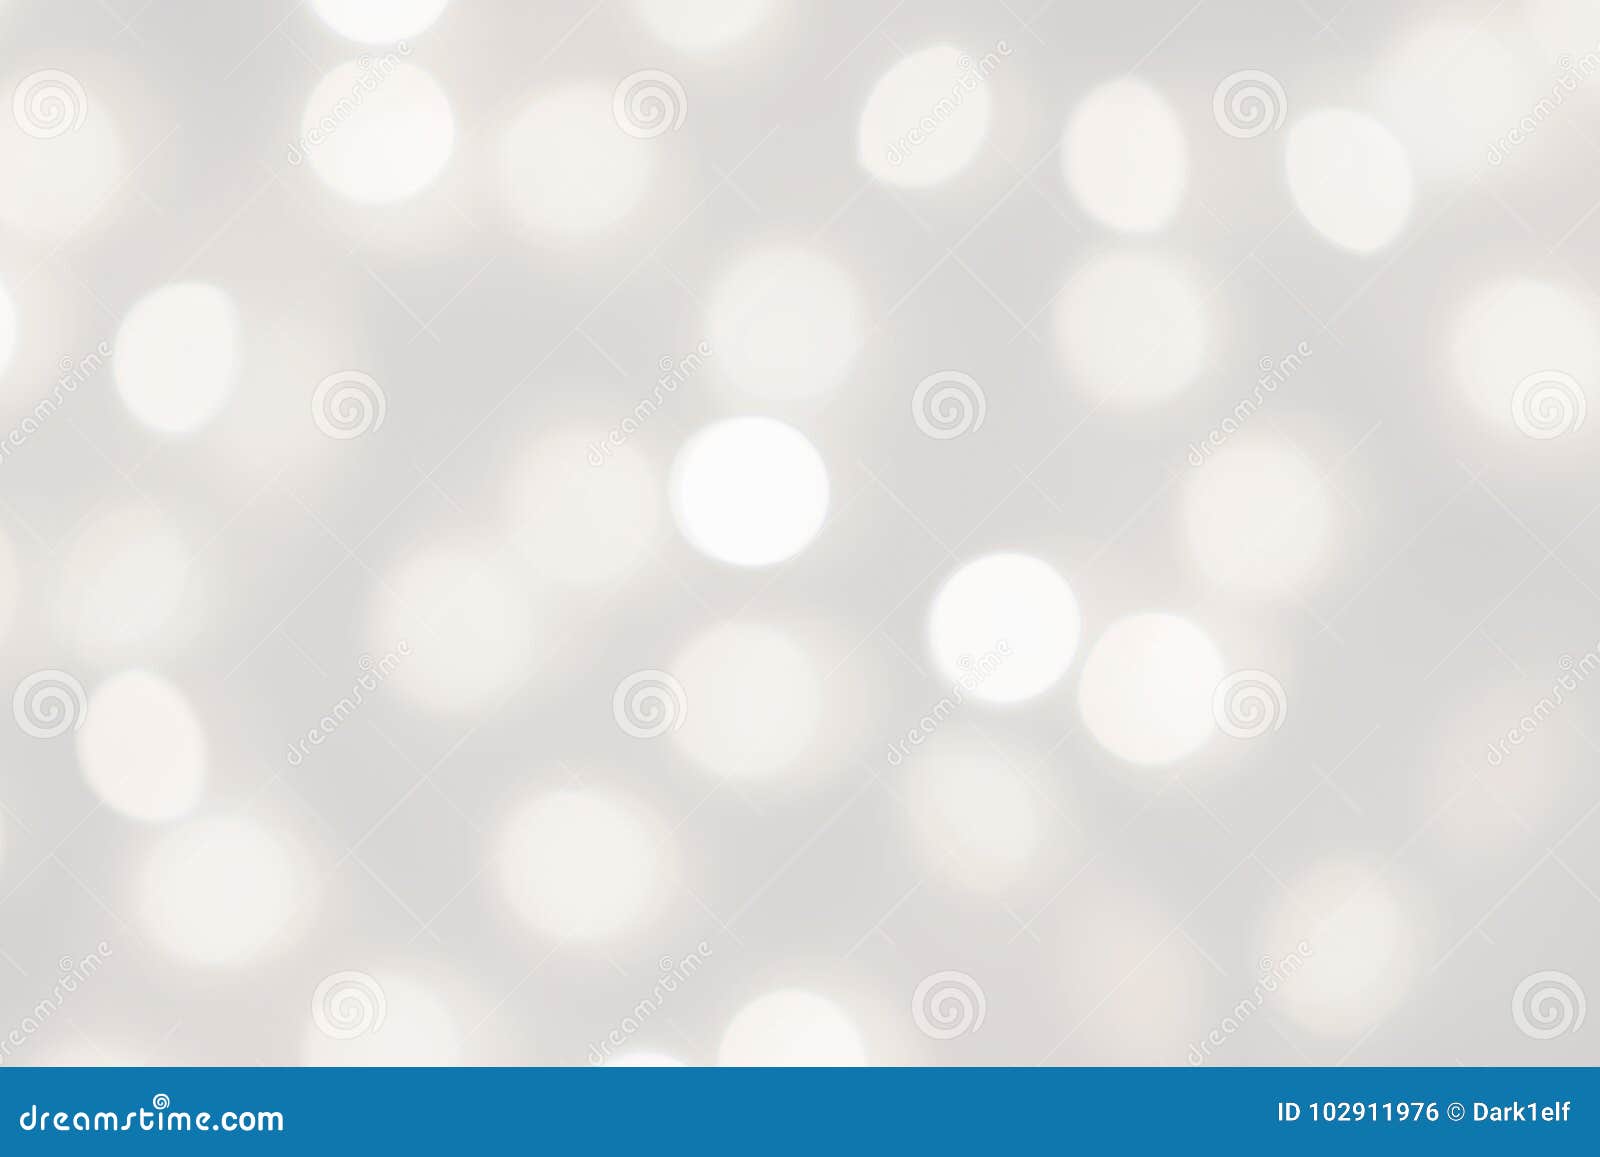 white lights bokeh blurred background, abstract beautiful blurry silver christmas holiday party texture, copy space